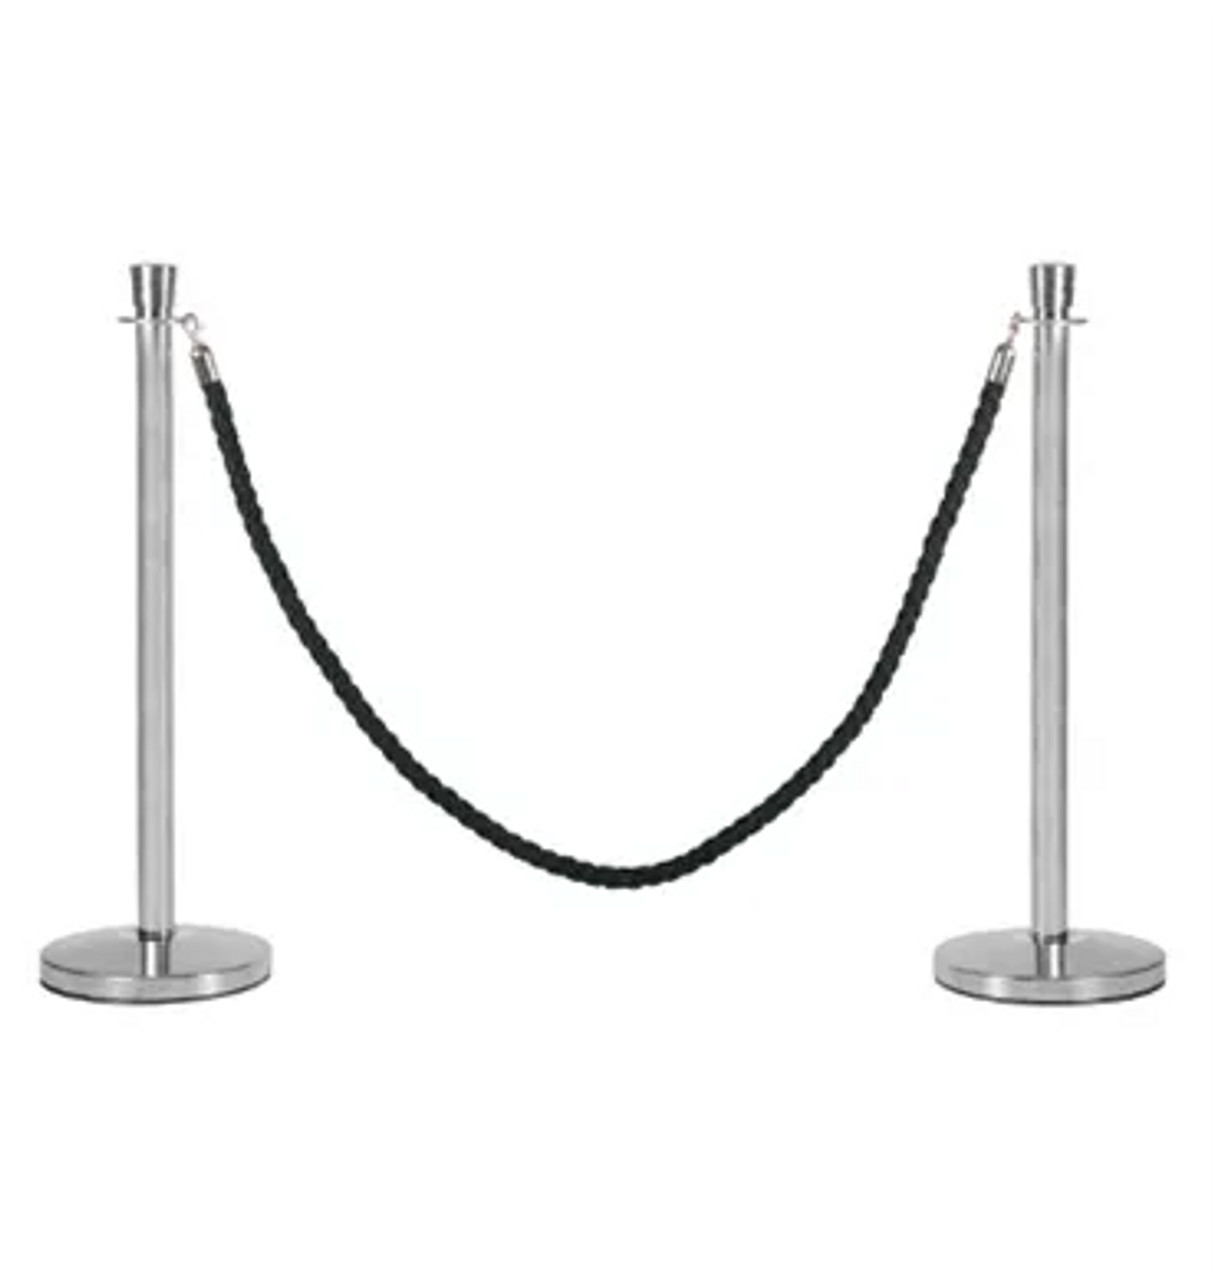 Black Rope with Chrome Ends for Traditional Bollards